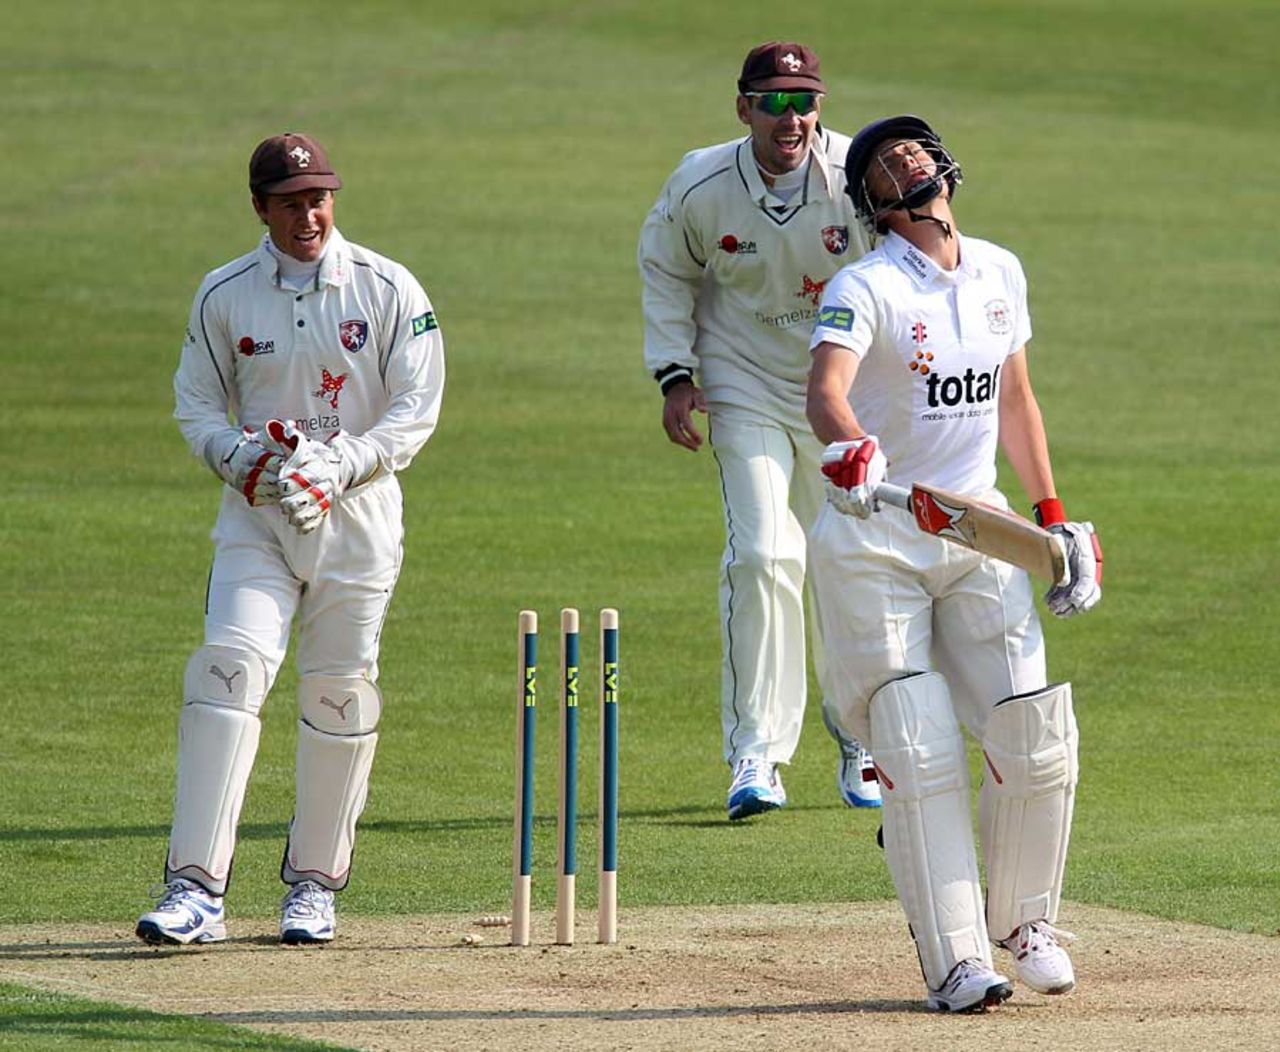 Will Gidman was bowled by James Tredwell for 10, Kent v Gloucestershire, County Championship, Division Two, Canterbury, April 26, 2011